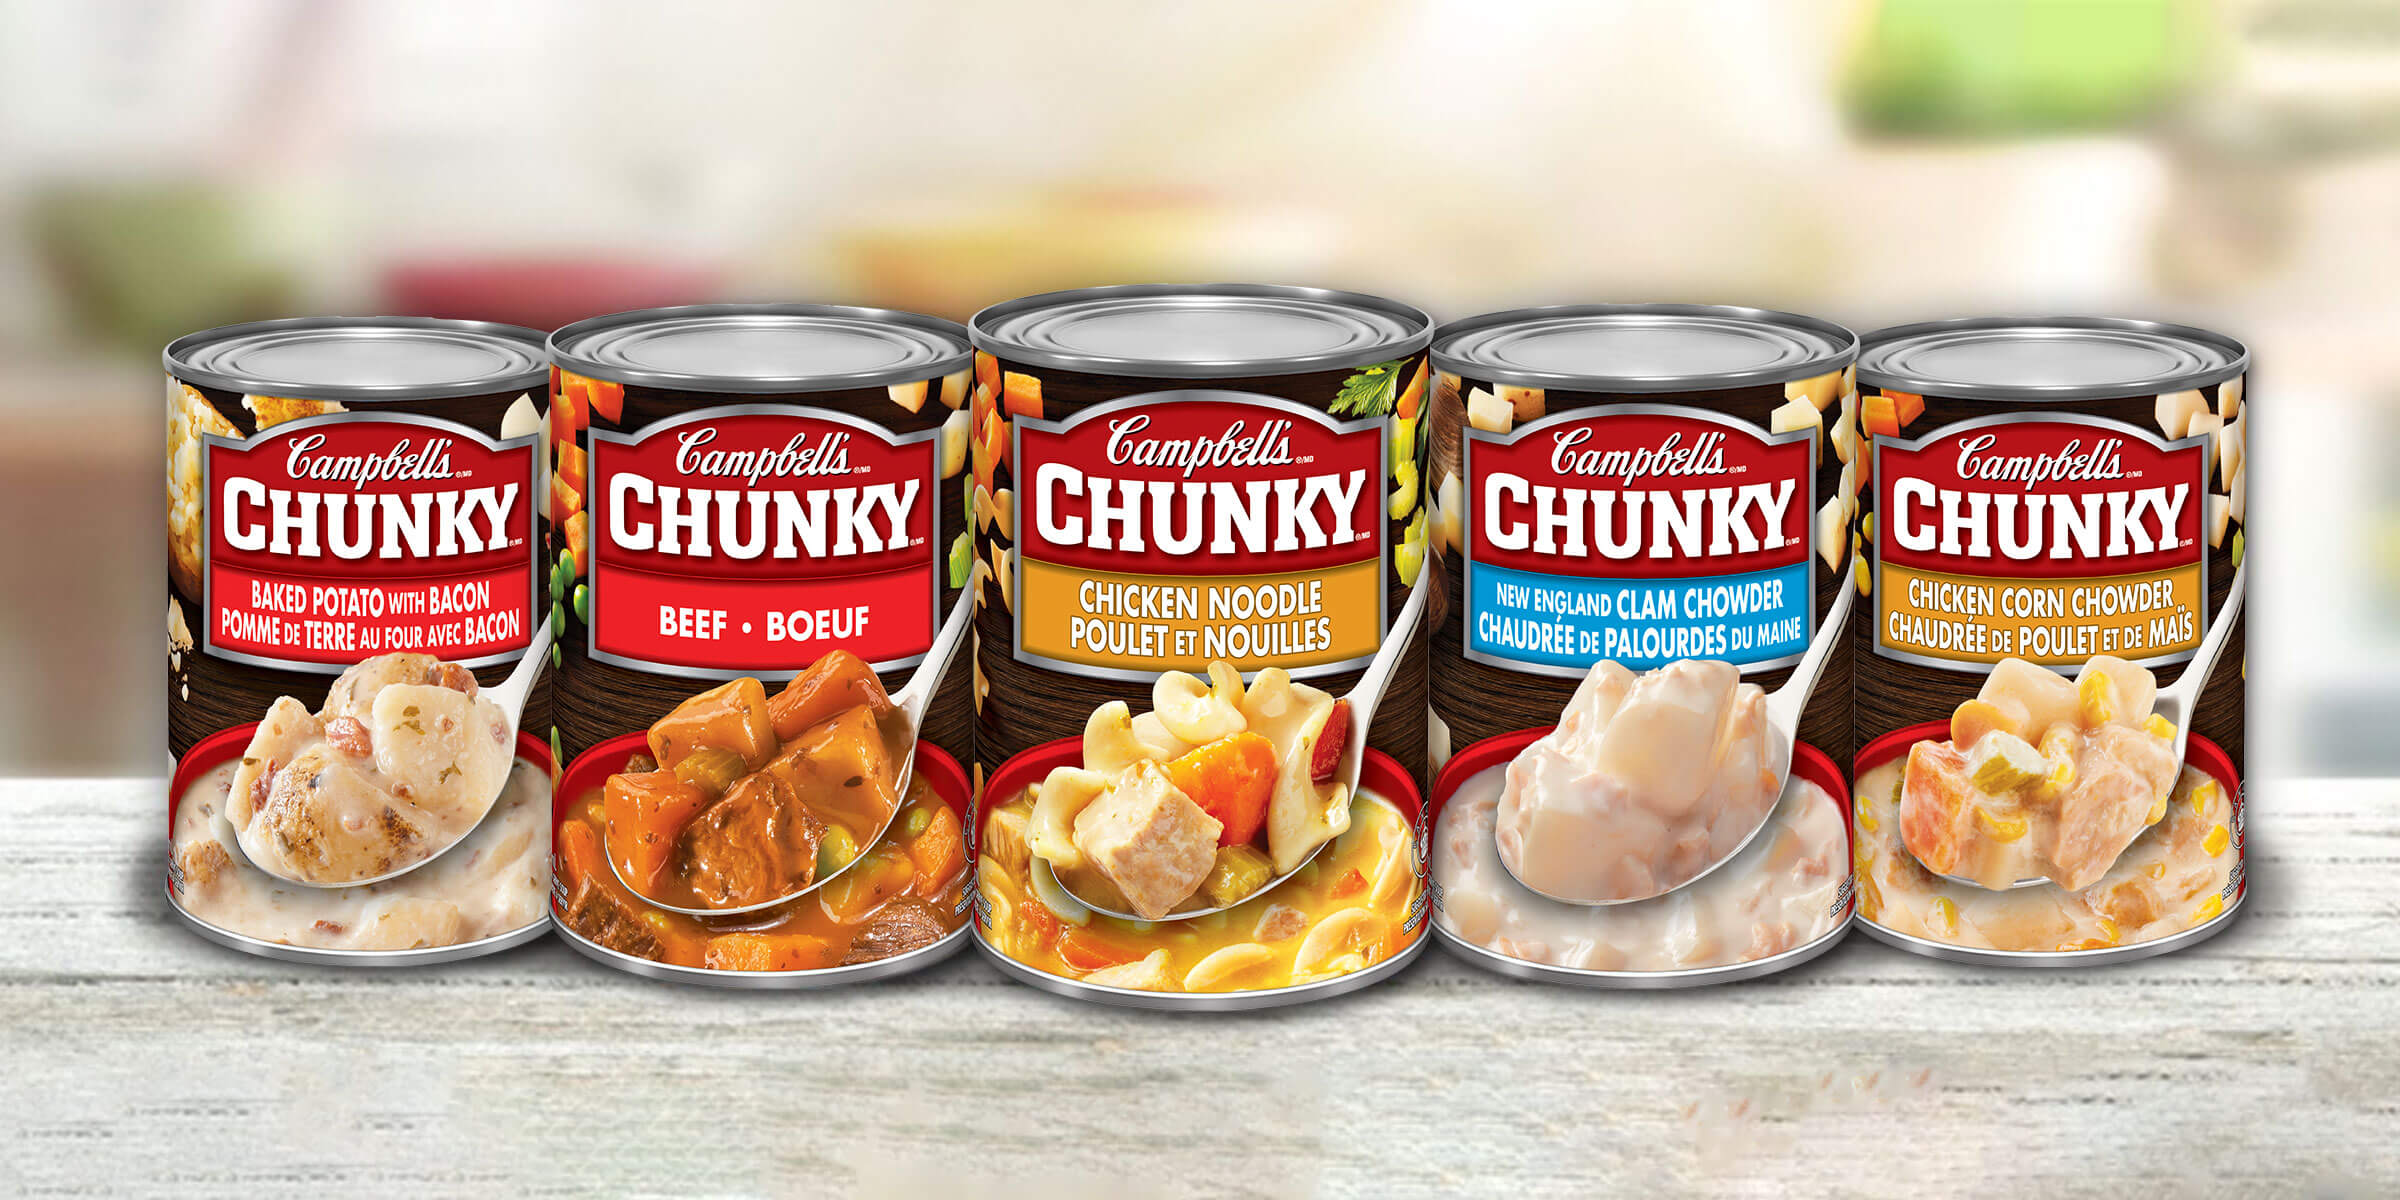 Campbell's Chunky products